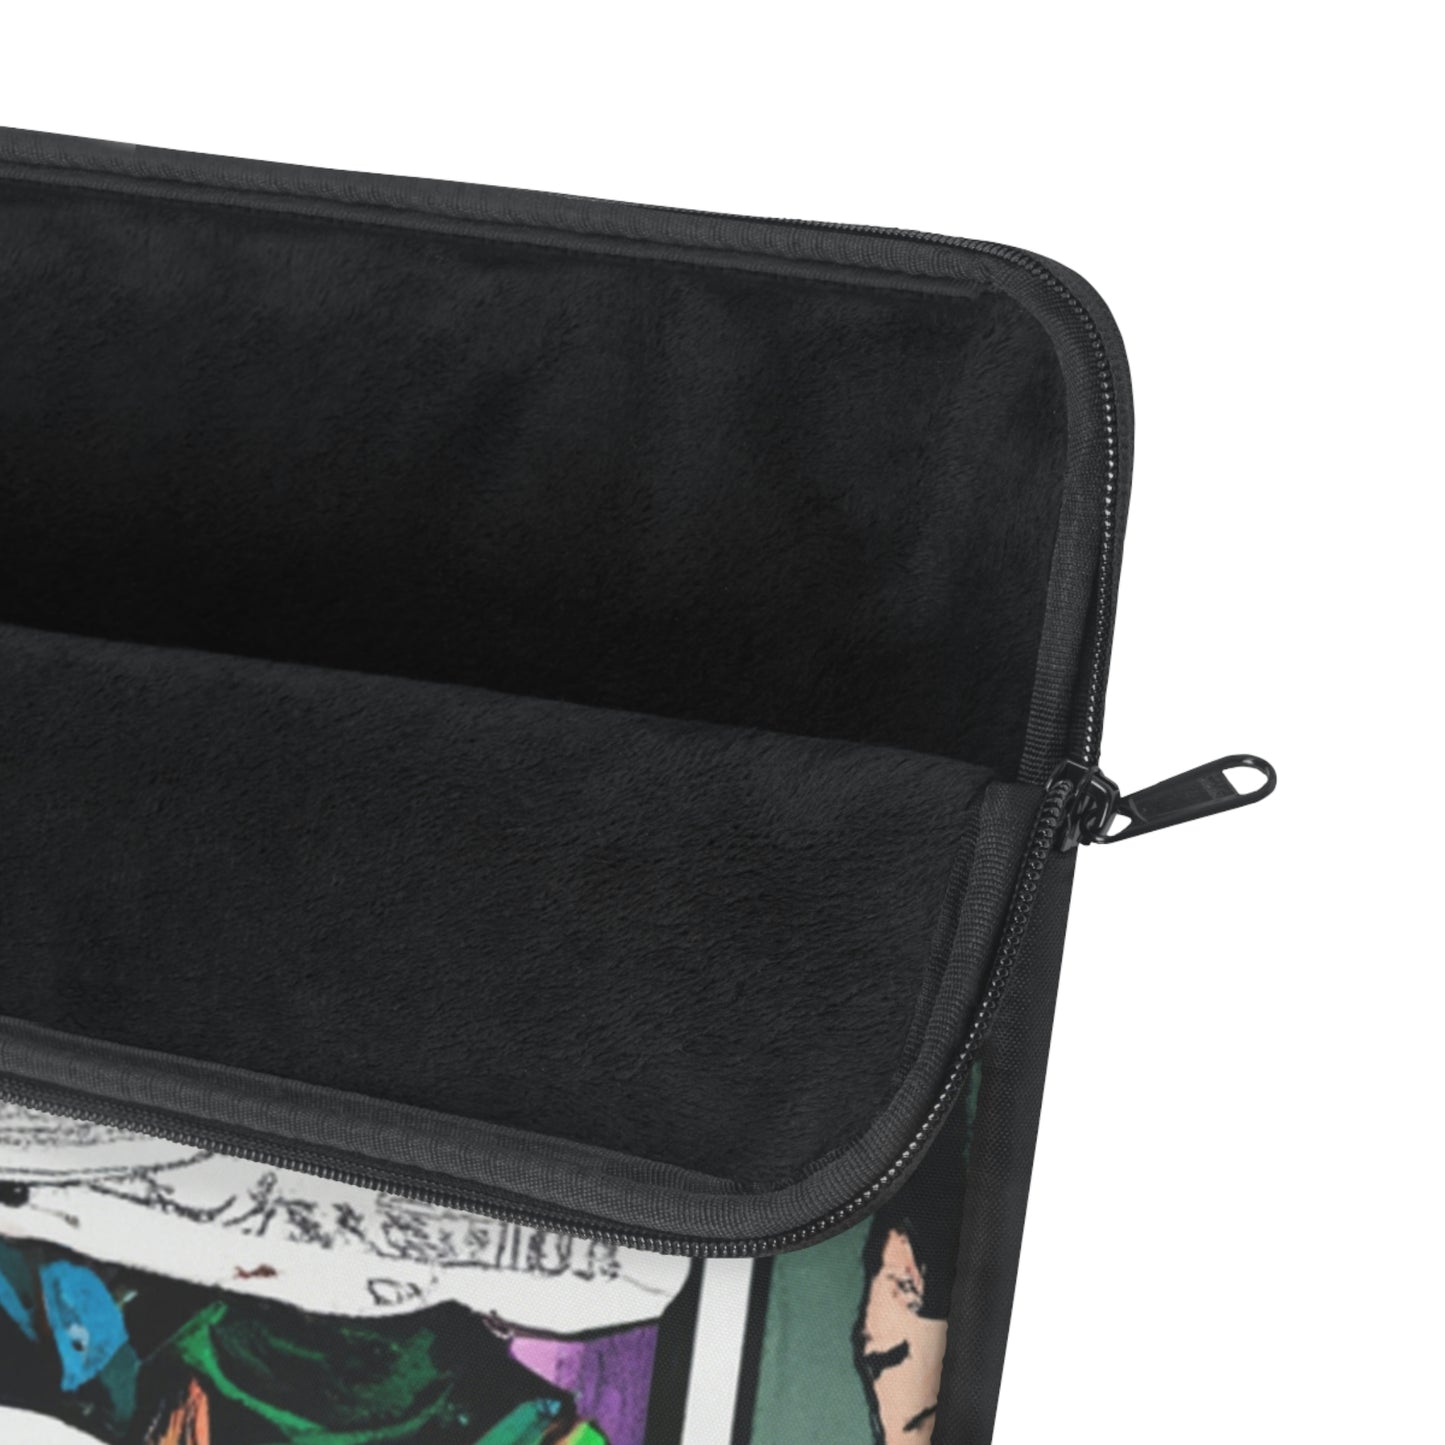 Babs Bopster - Comic Book Collector Laptop Computer Sleeve Storage Case Bag